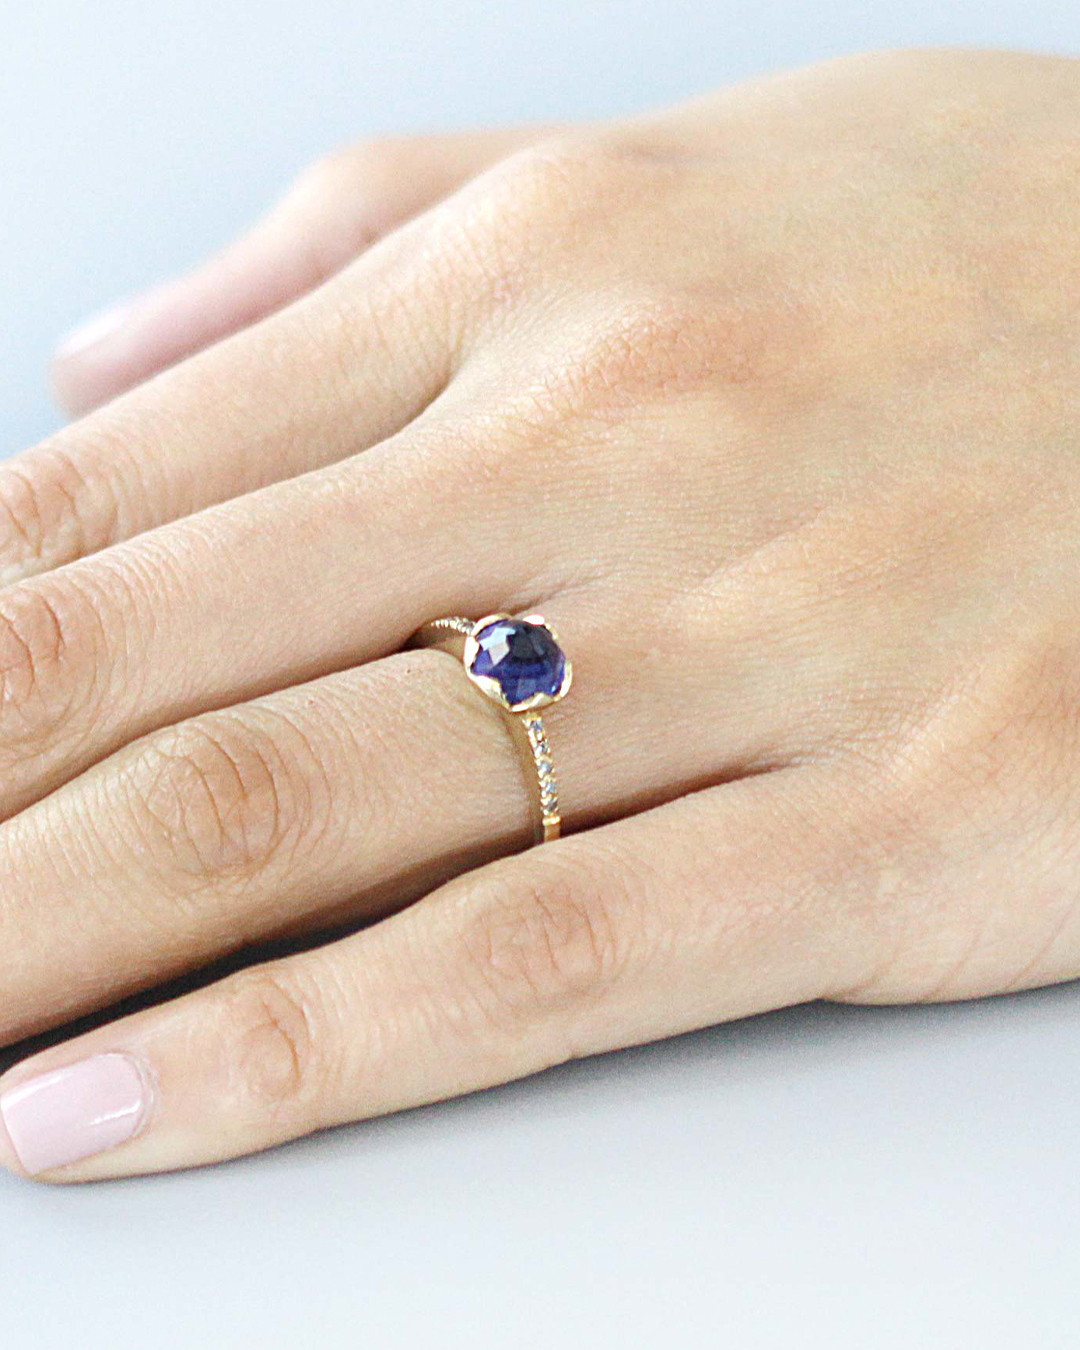 Pave / 6.5mm Blue Sapphire Ring By fitzgerald jewelry